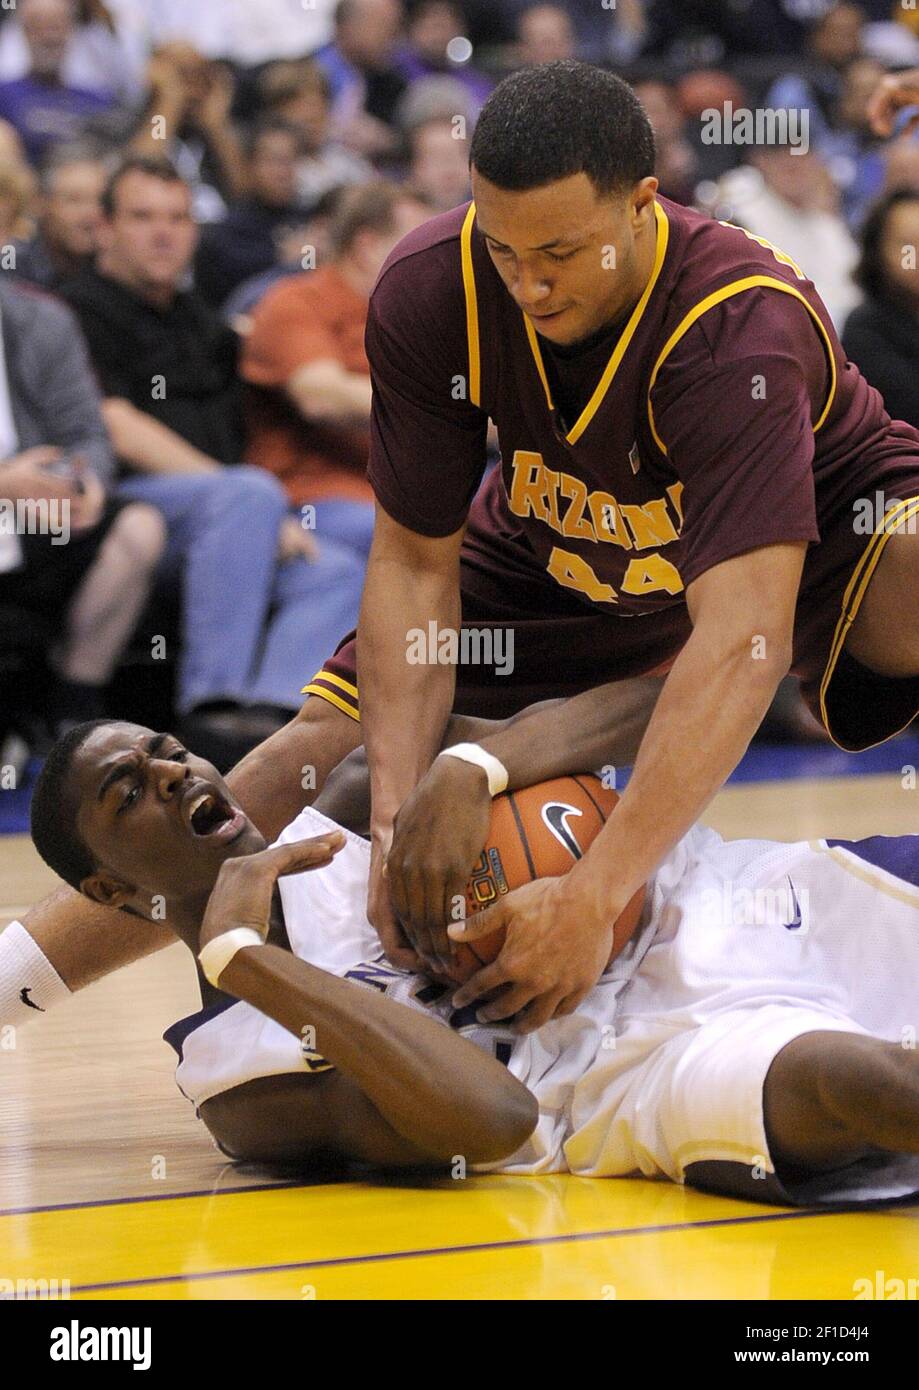 Arizona State's Jerren Ship wrestles for a loose ball with Washington's Justin Holiday during the Pac-10 men's basketball tournament on Friday, March 13, 2009, at the Staples Center in Los Angeles, California. (Photo by Kevin Sullivan/Orange County Register/MCT/Sipa USA) Stock Photo